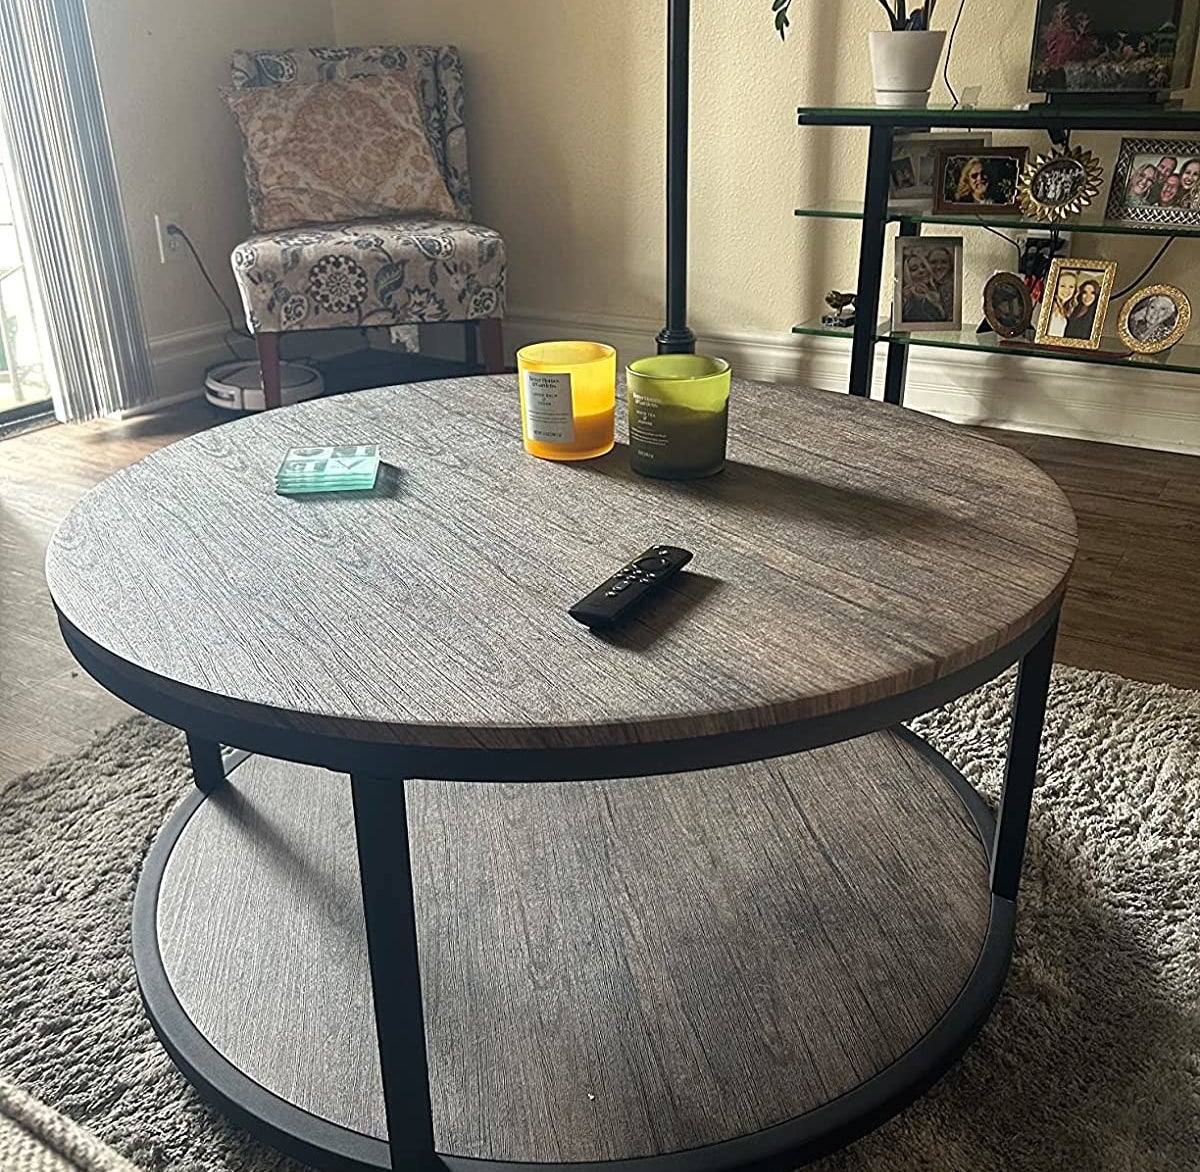 A reviewer&#x27;s photo of the round coffee table